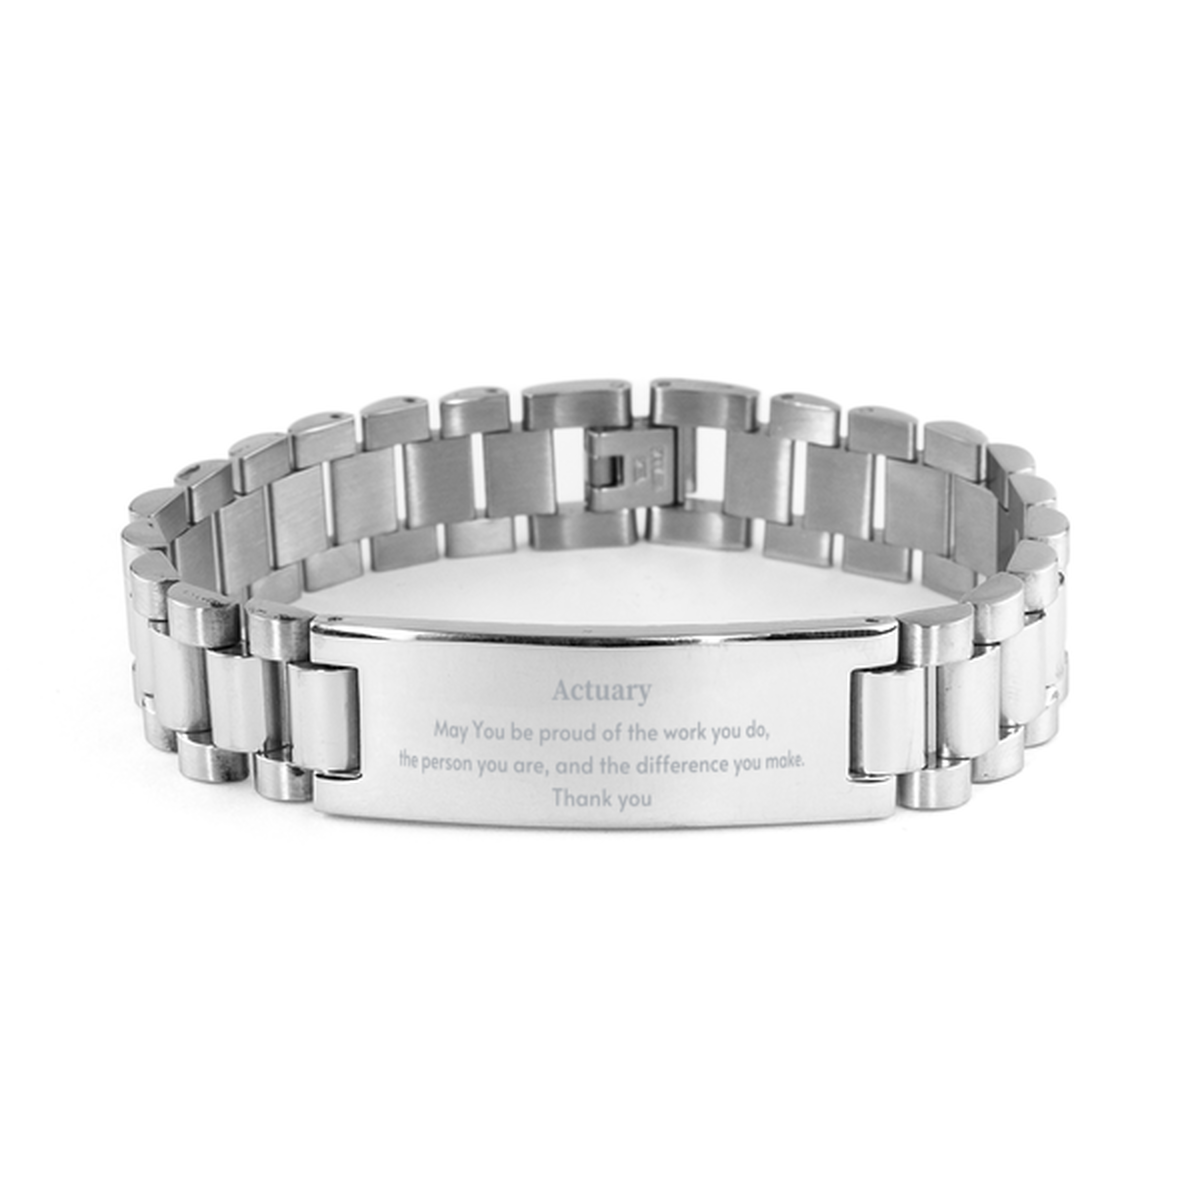 Heartwarming Ladder Stainless Steel Bracelet Retirement Coworkers Gifts for Actuary, Actuary May You be proud of the work you do, the person you are Gifts for Boss Men Women Friends